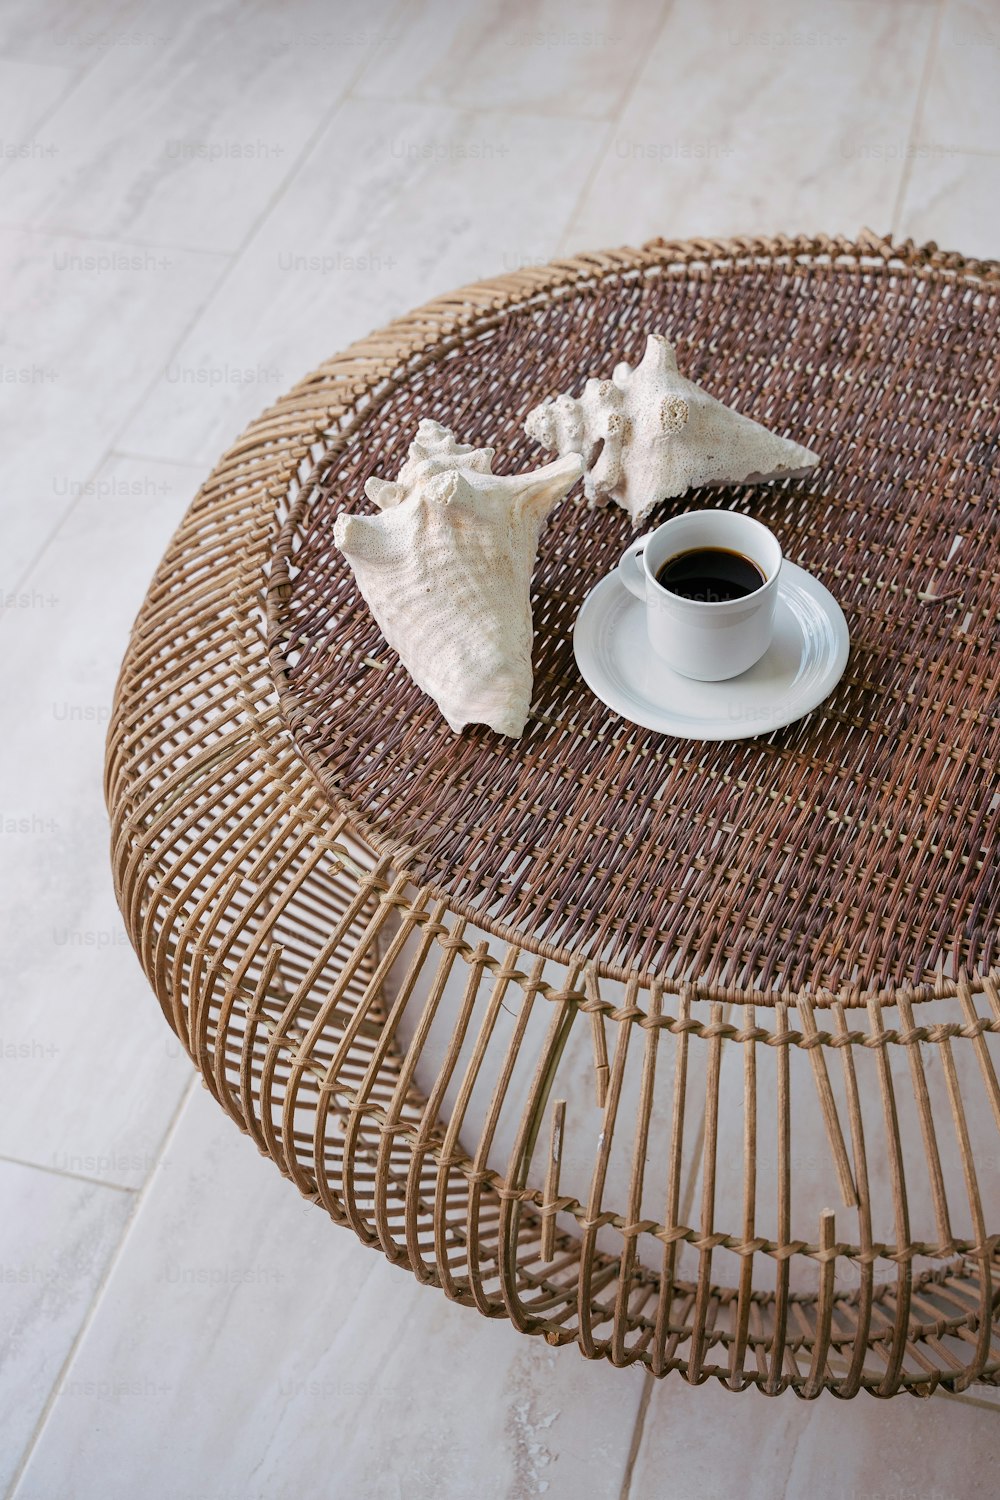 a wicker table with a cup of coffee and seashells on it